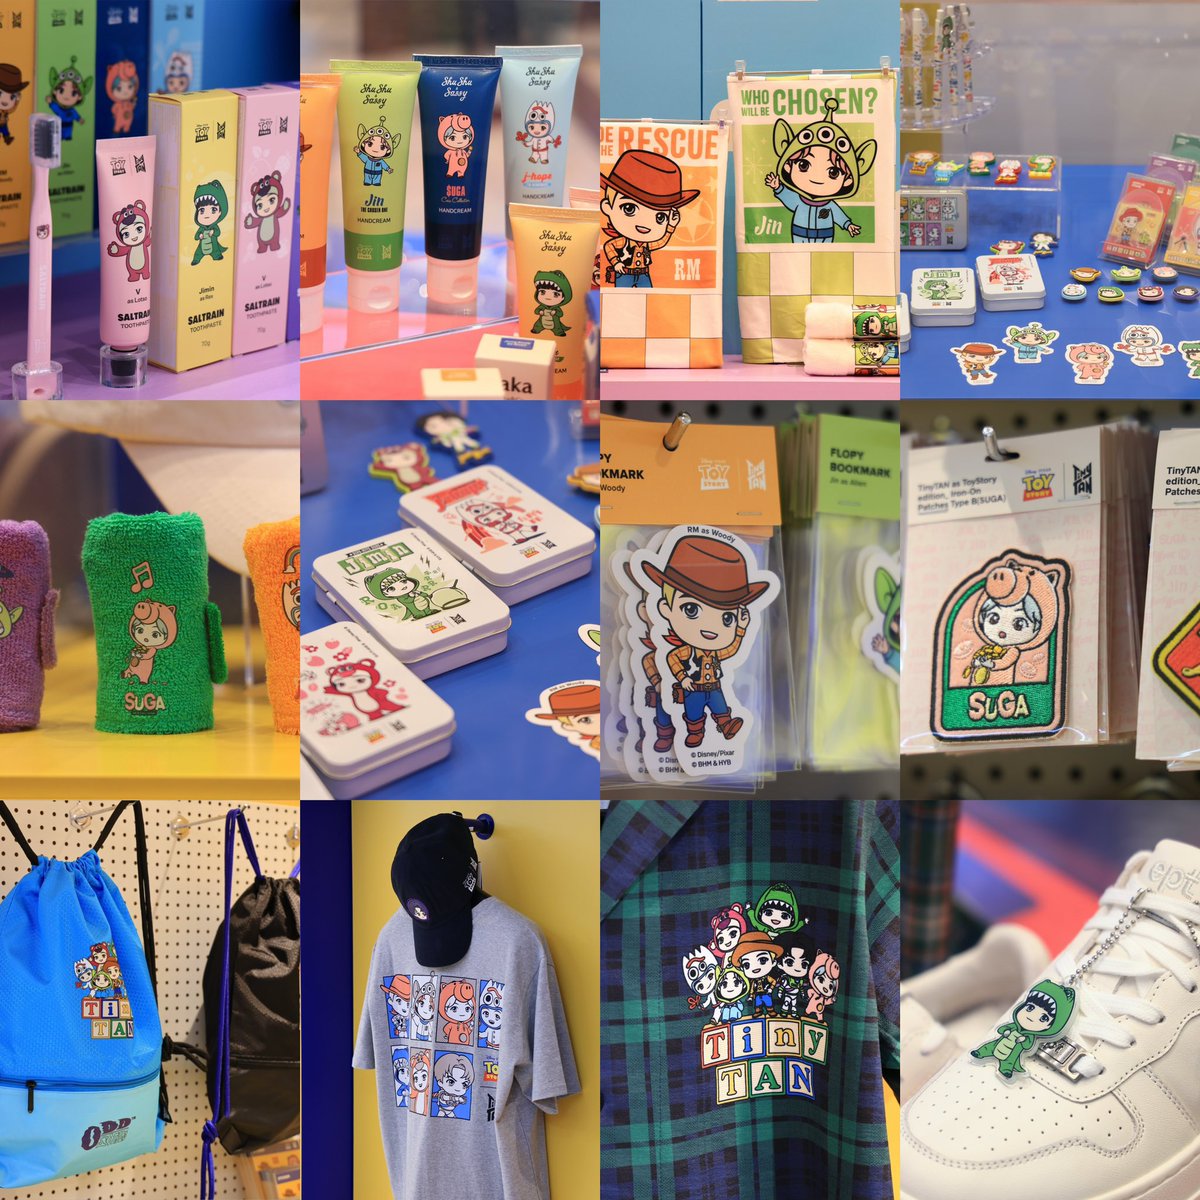 #AOLGOs | PH GO
wts lfb pasabuy

TinyTAN x Toy Story Pop Up Store
Korea Pasabuy 

Blanket
Acrylic Stand
Graphic Shirts
Soap
Stainless Cup
Sticker Pack
Sneakers
Keyring
Handcream
Toothpaste
Lip Oil
Mug

Can accept orders until May 10
Until stocks last

Message us if interested 💜